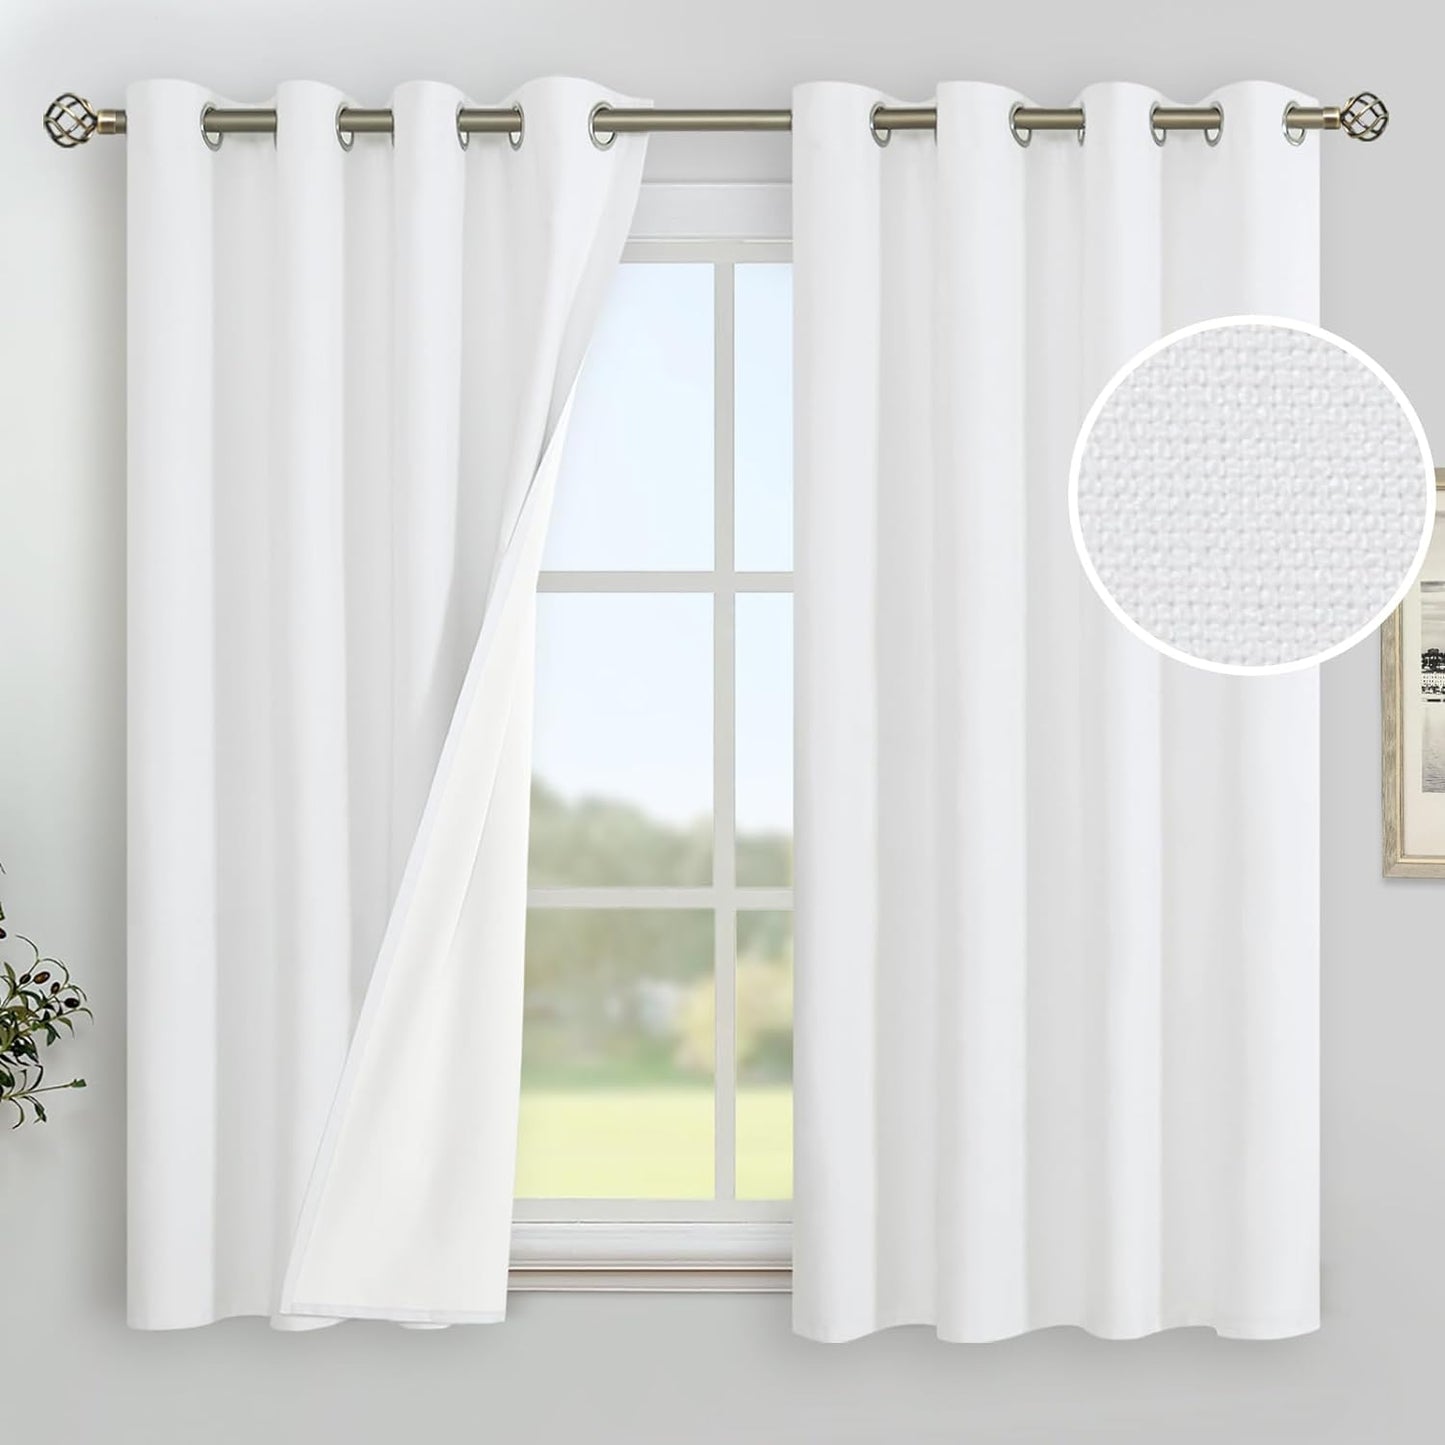 Youngstex Linen Blackout Curtains 63 Inches Long, Grommet Full Room Darkening Linen Window Drapes Thermal Insulated for Living Room Bedroom, 2 Panels, 52 X 63 Inch, Linen  YoungsTex White 52W X 45L 